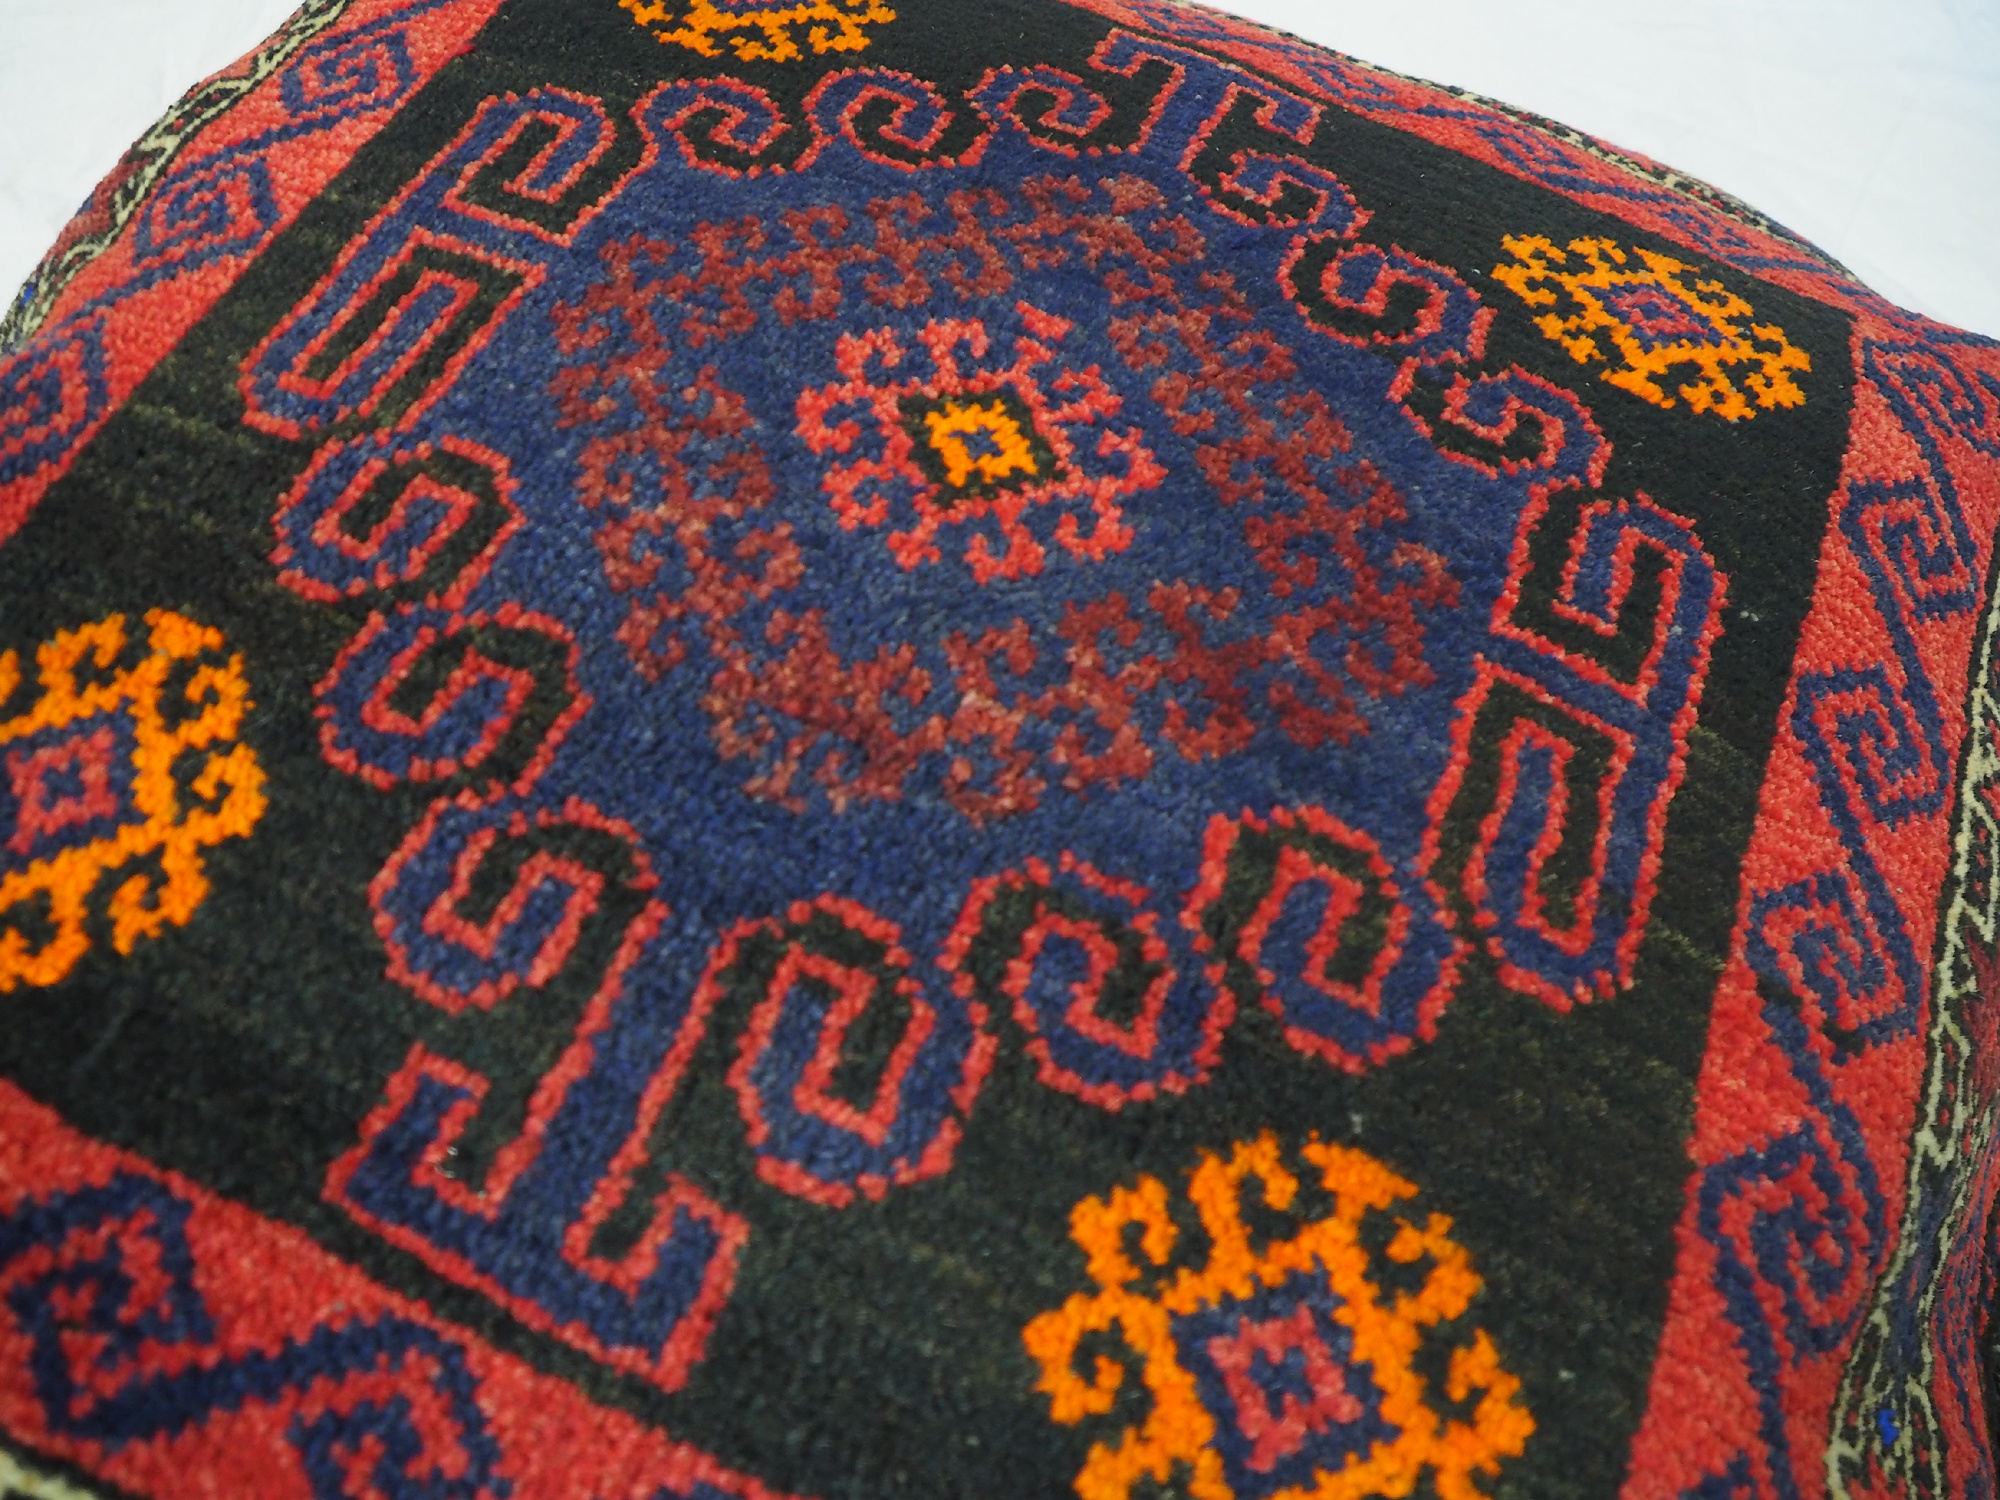 antique very rare Balochi nomadic carpet cushion orient nomad rug seat Bohemian Afghanistan pillow 21/4